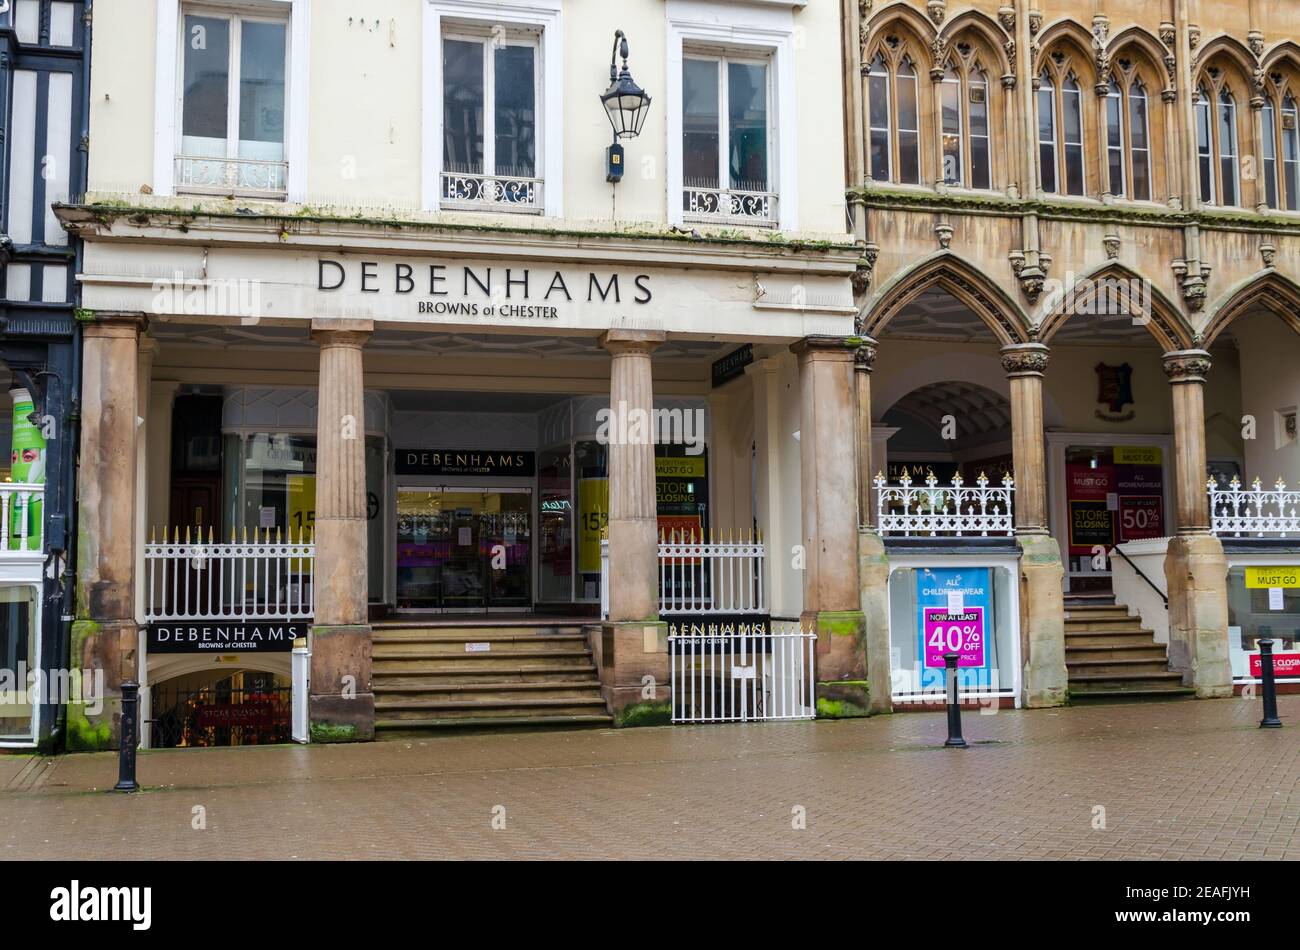 Chester; UK: Jan 29, 2021: The Debenhams department store on Eastgate Street was the only shop in the chain to retain its original name Browns of Ches Stock Photo